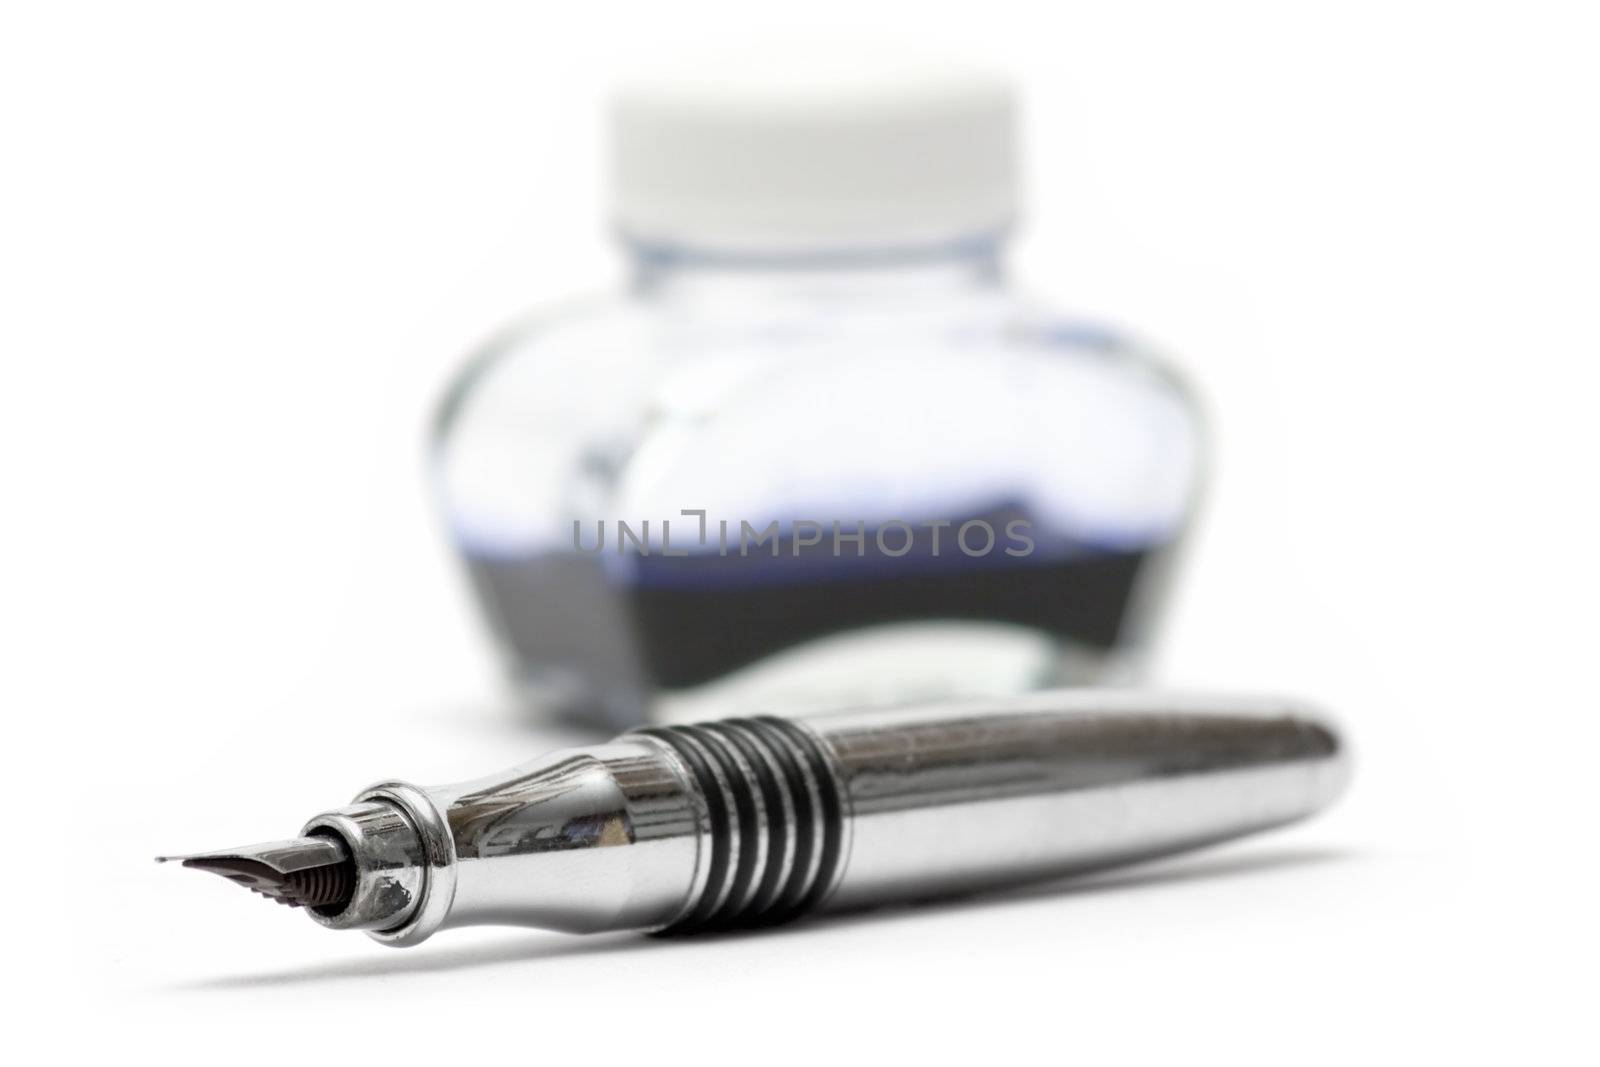 Silver fountain pen in front of an ink pot. Isolated on a white background. Shallow depth of field.